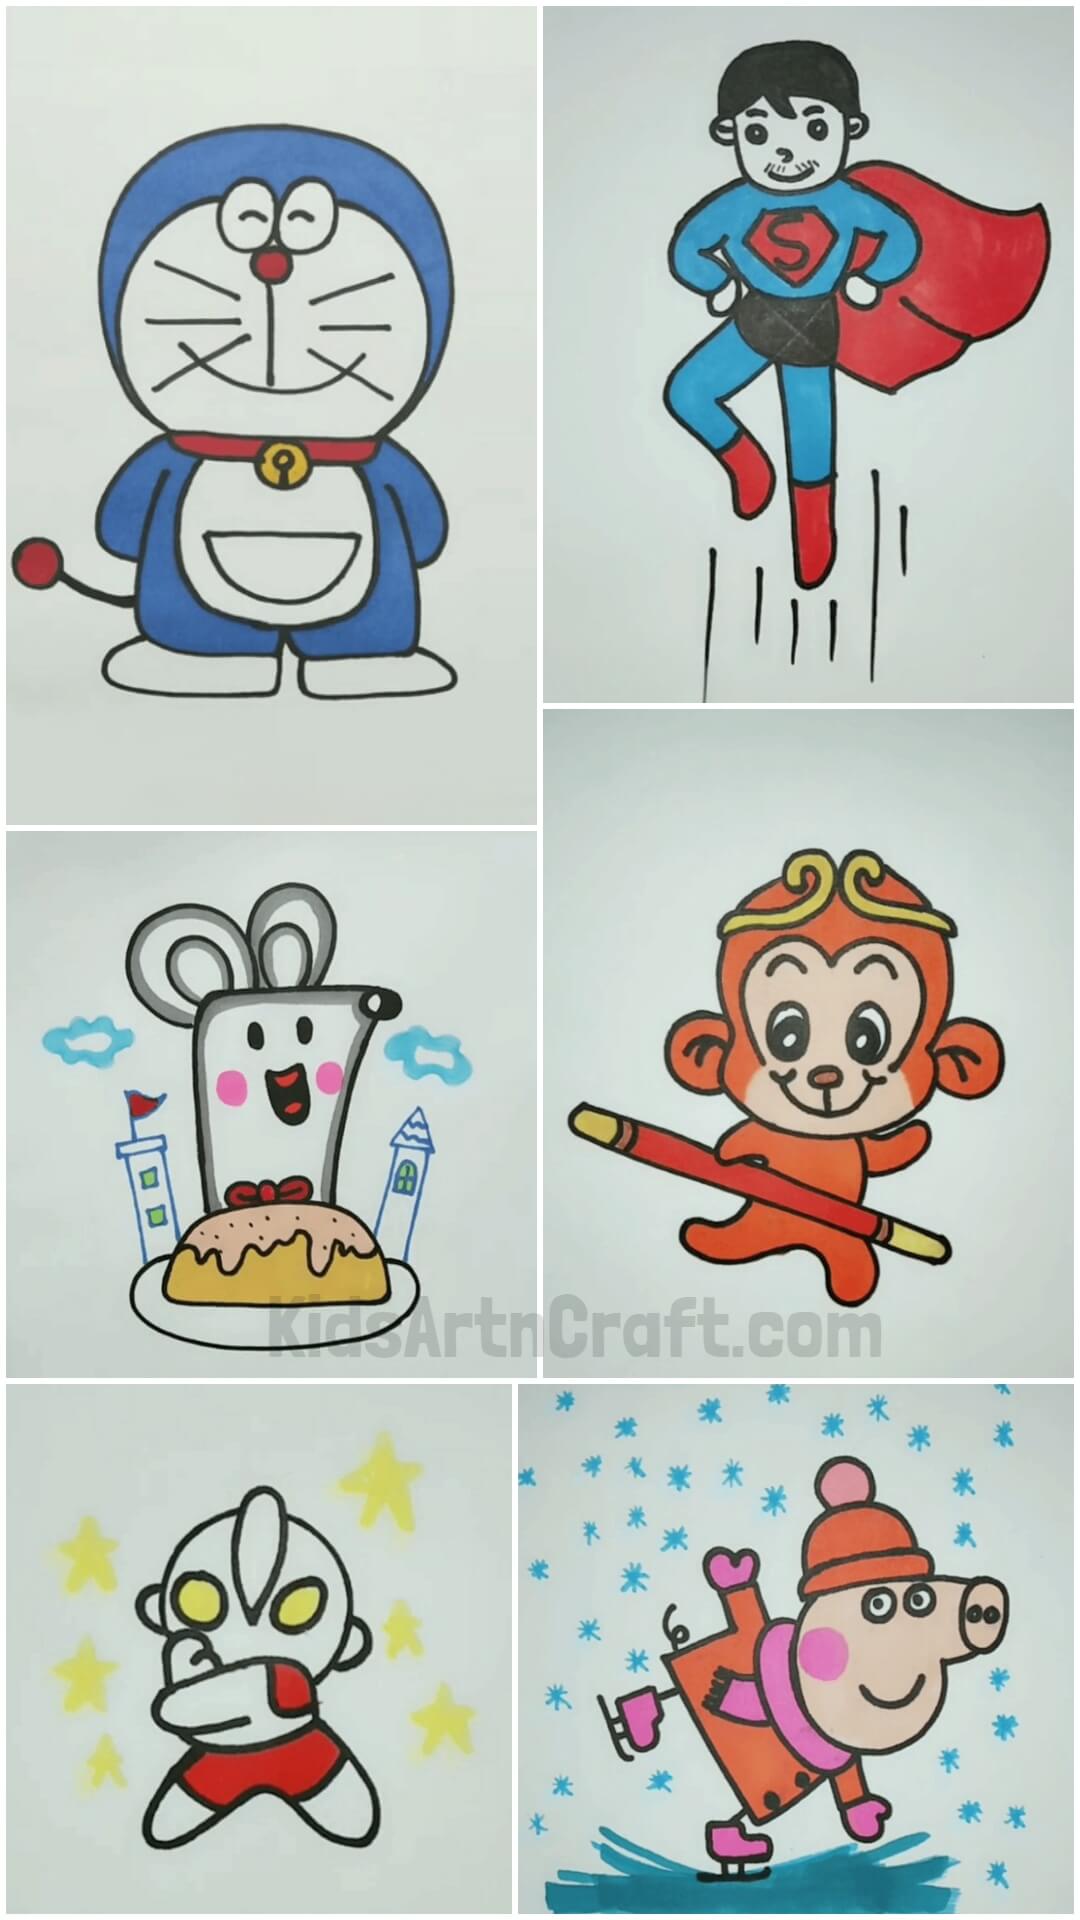 Easy Cartoon Characters to Draw for Kids Tutorial - YouTube-saigonsouth.com.vn